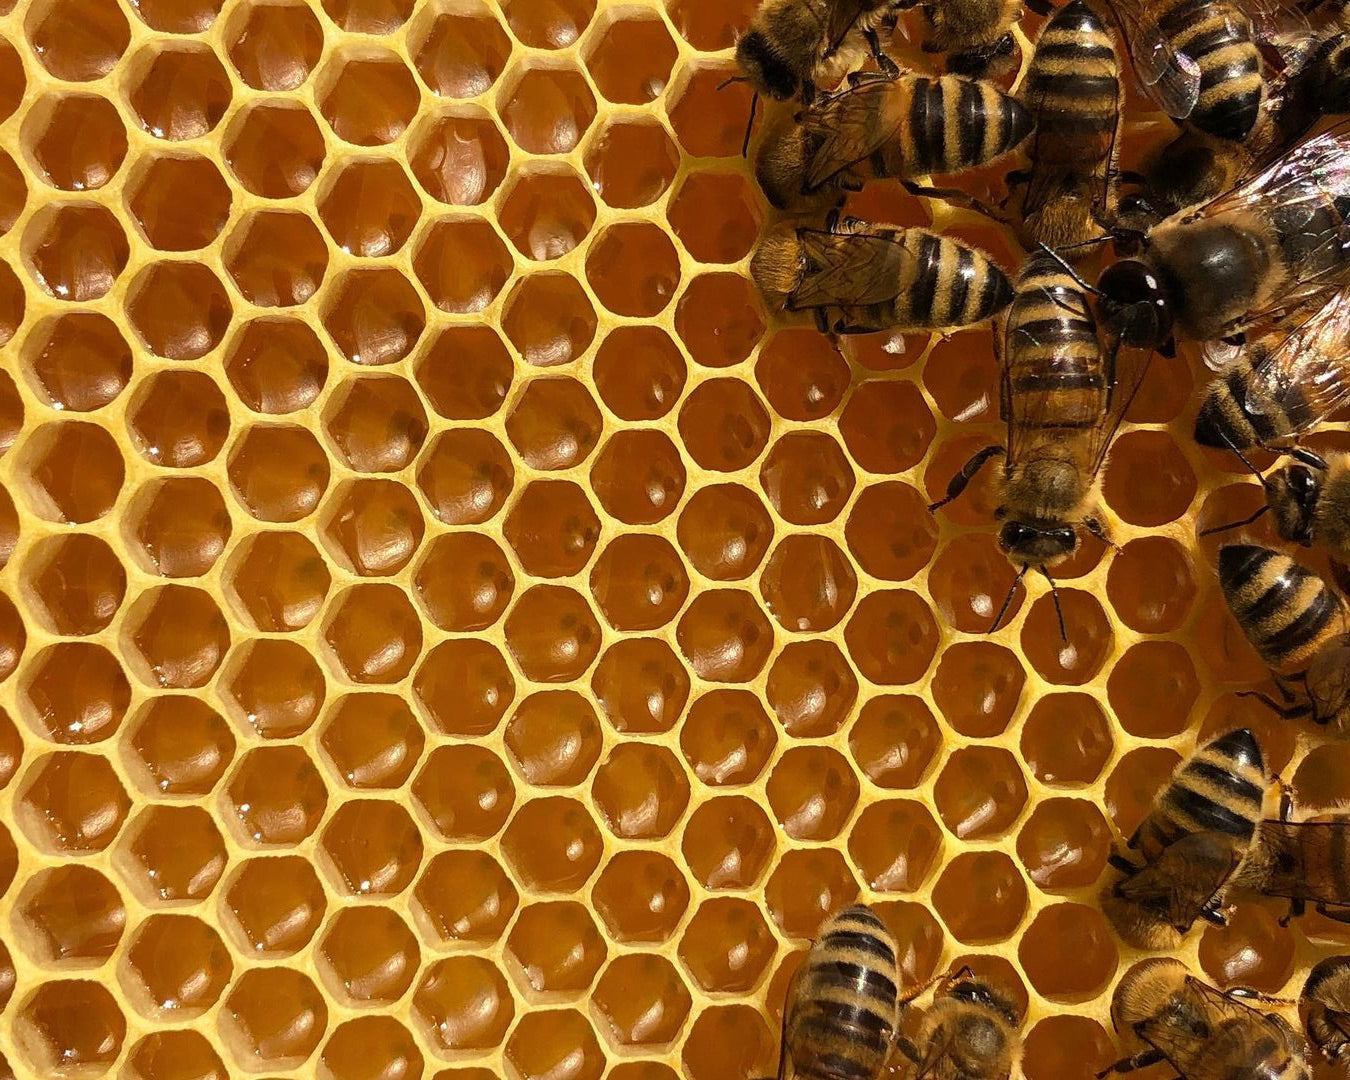 How to start beekeeping: four female beekeepers share their